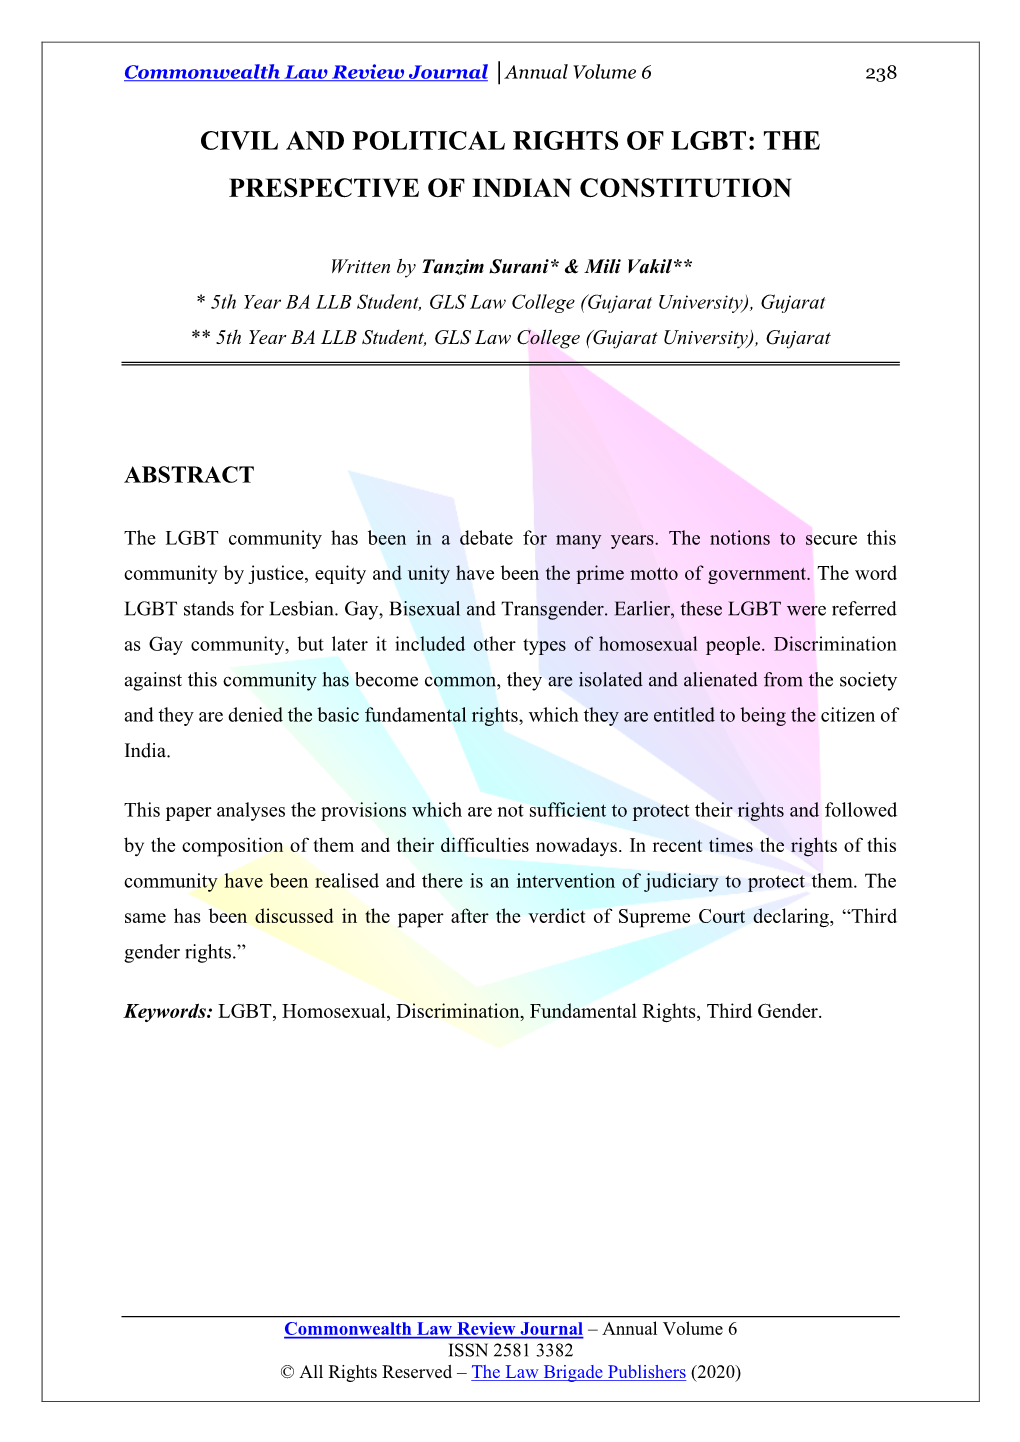 Civil and Political Rights of Lgbt: the Prespective of Indian Constitution